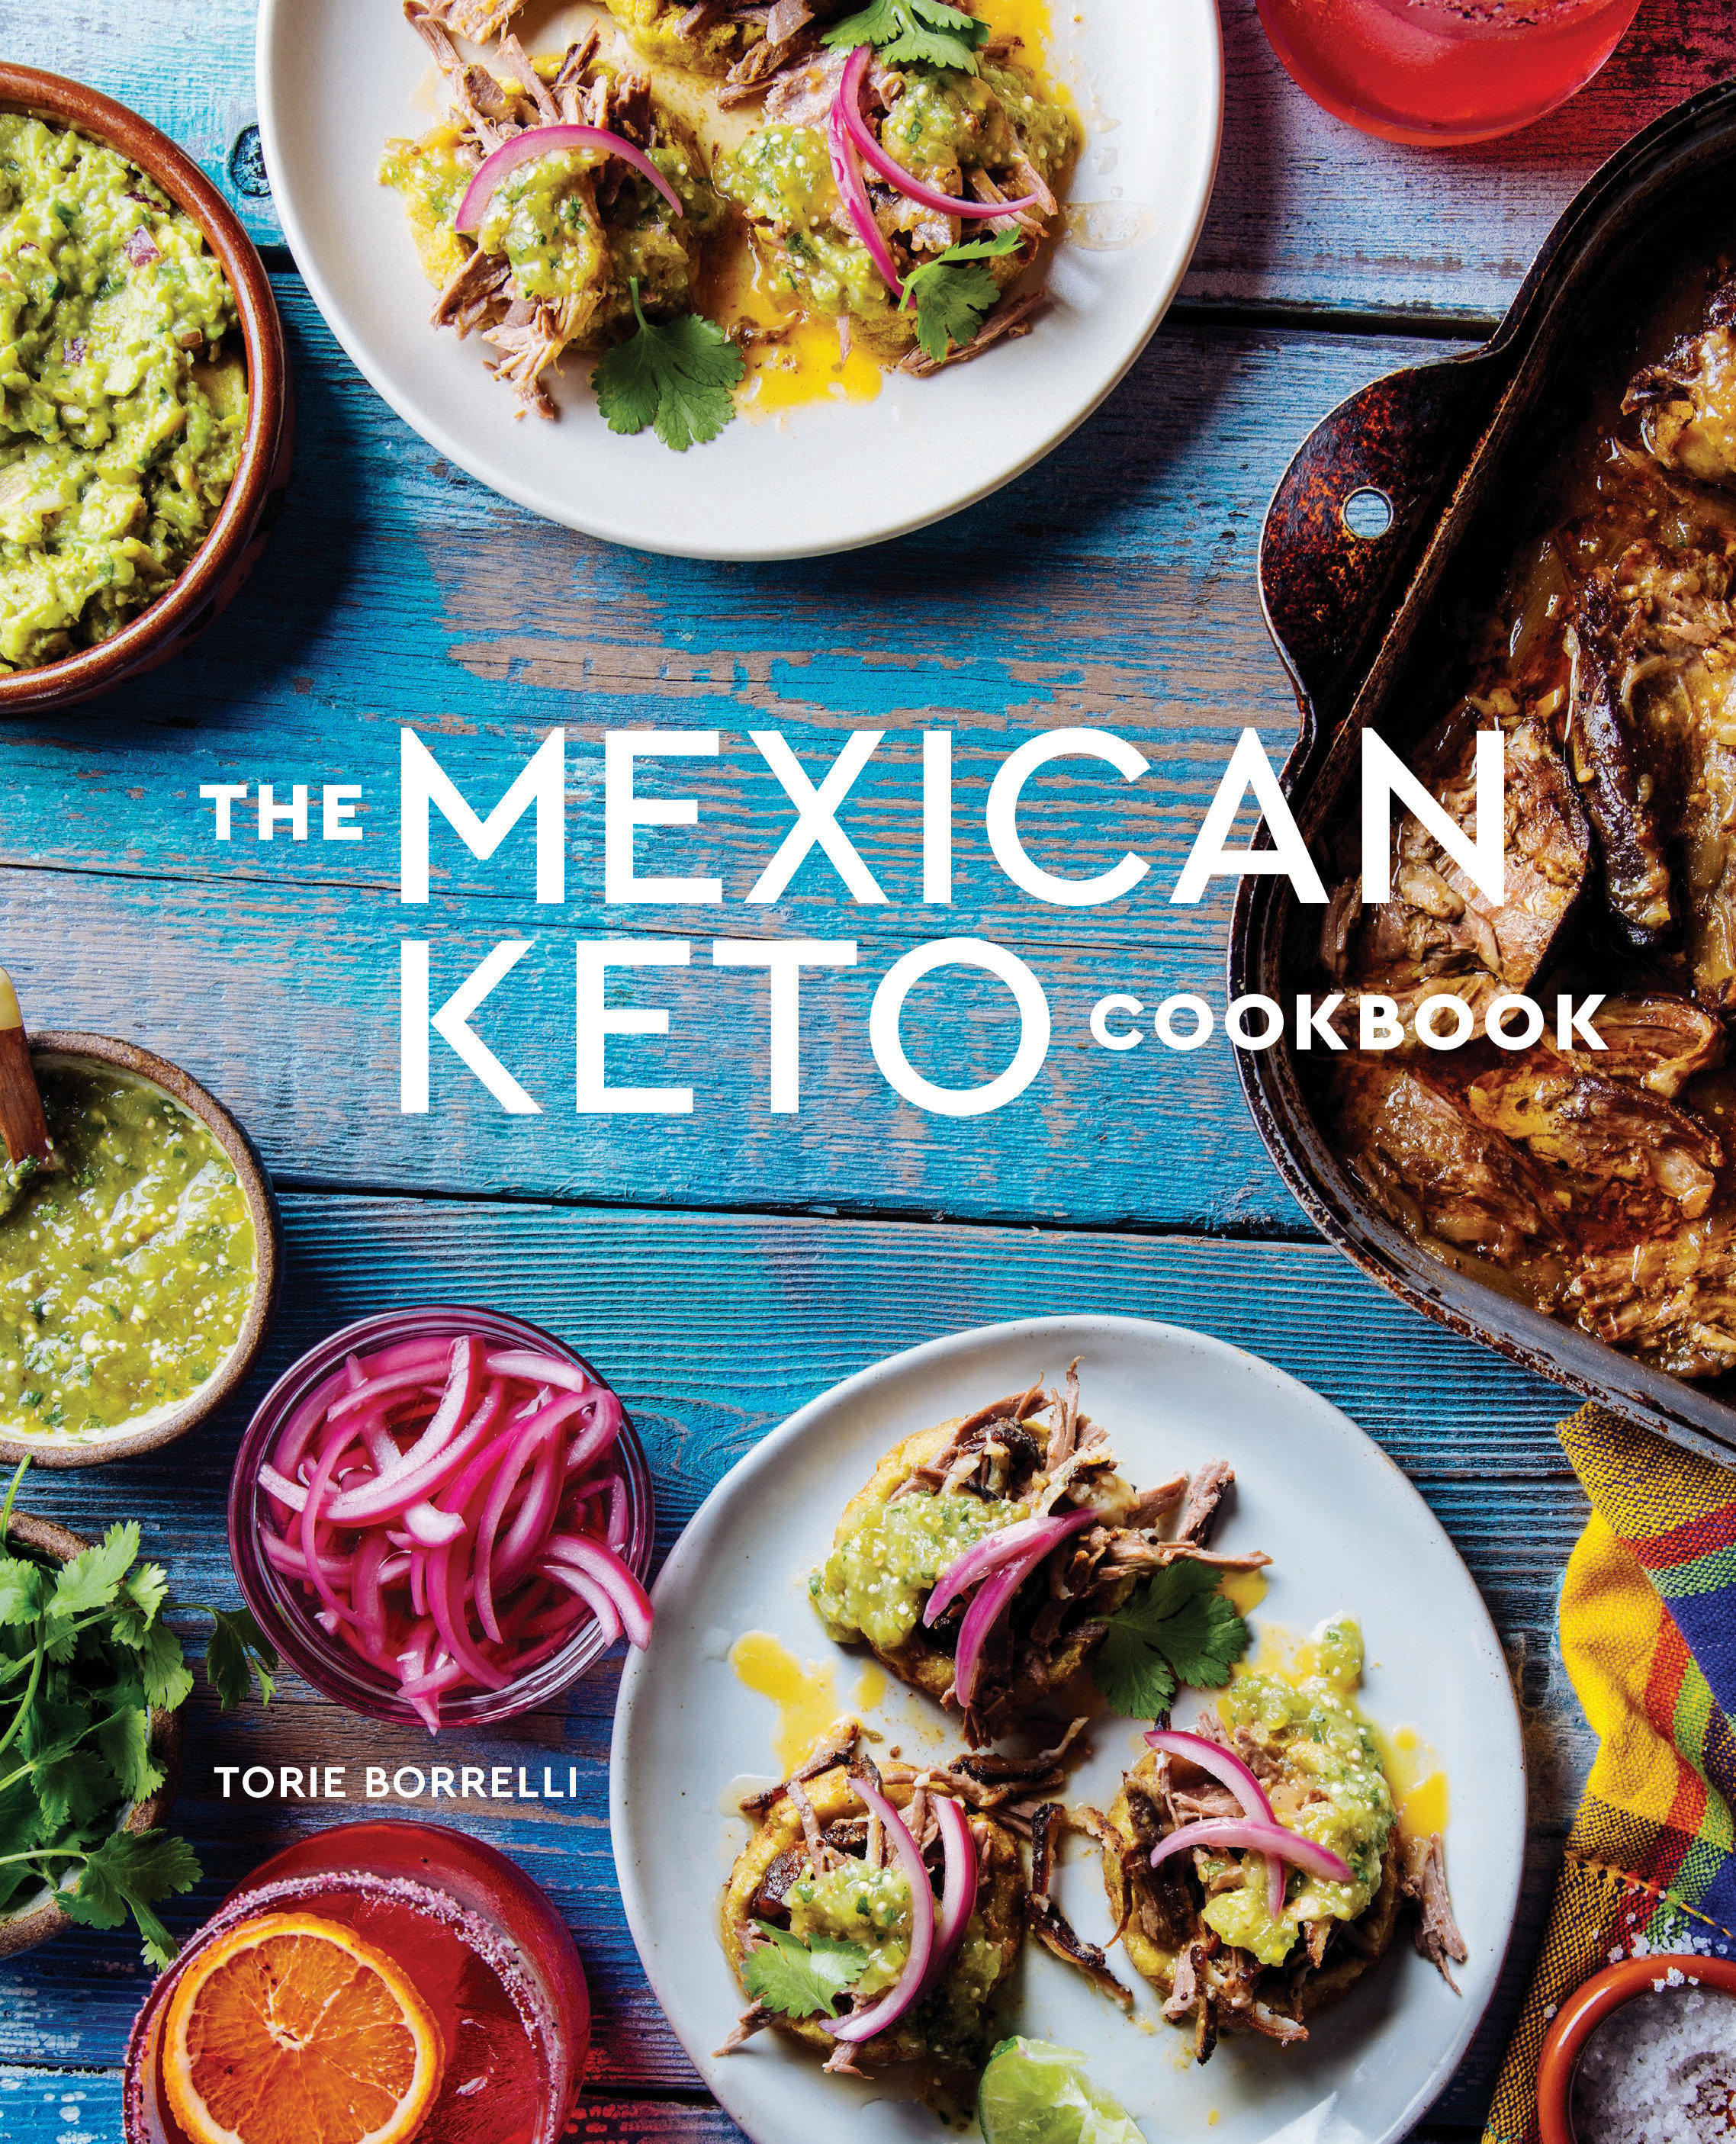 The Mexican Keto Cookbook (Hardcover Book)